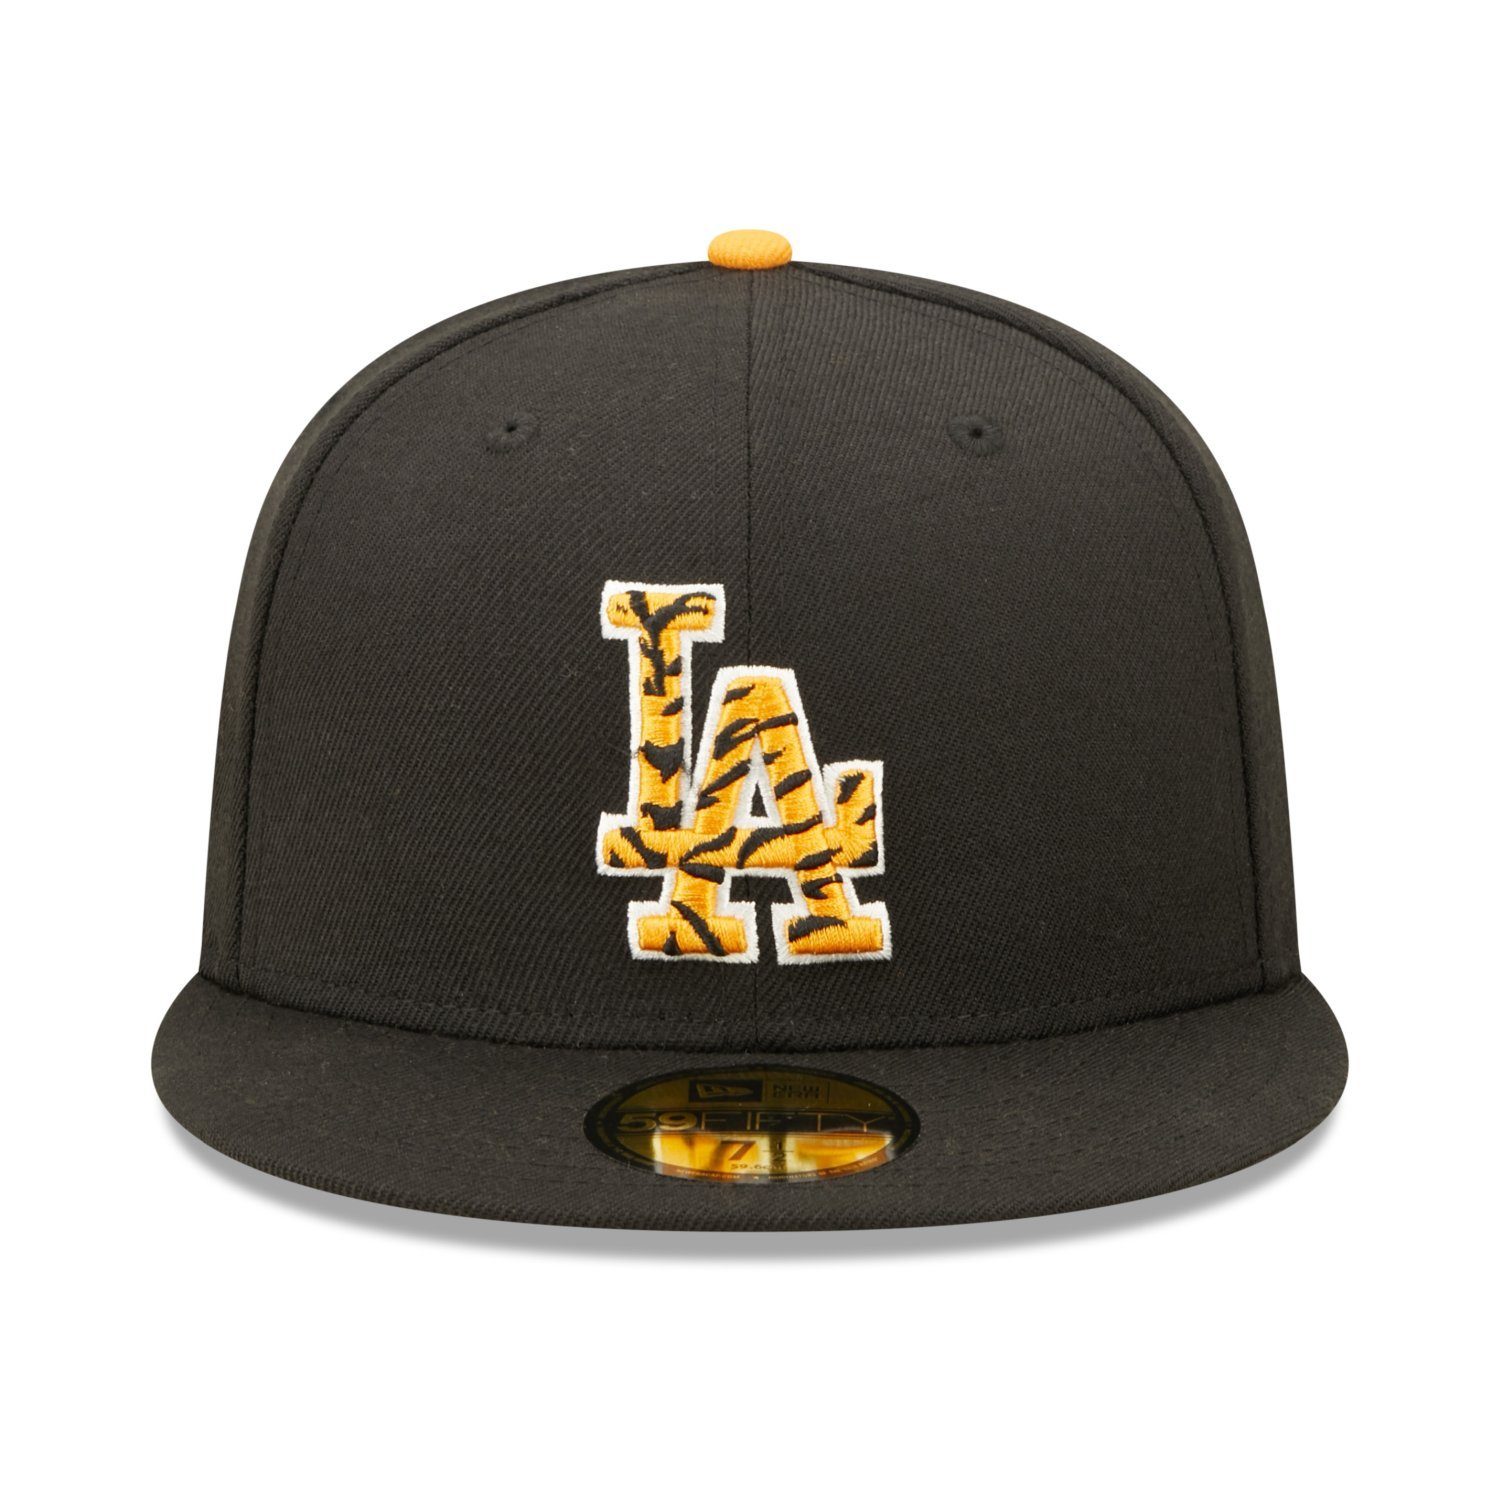 Cap Los Era Angeles TIGERFILL 59Fifty New Dodgers Fitted